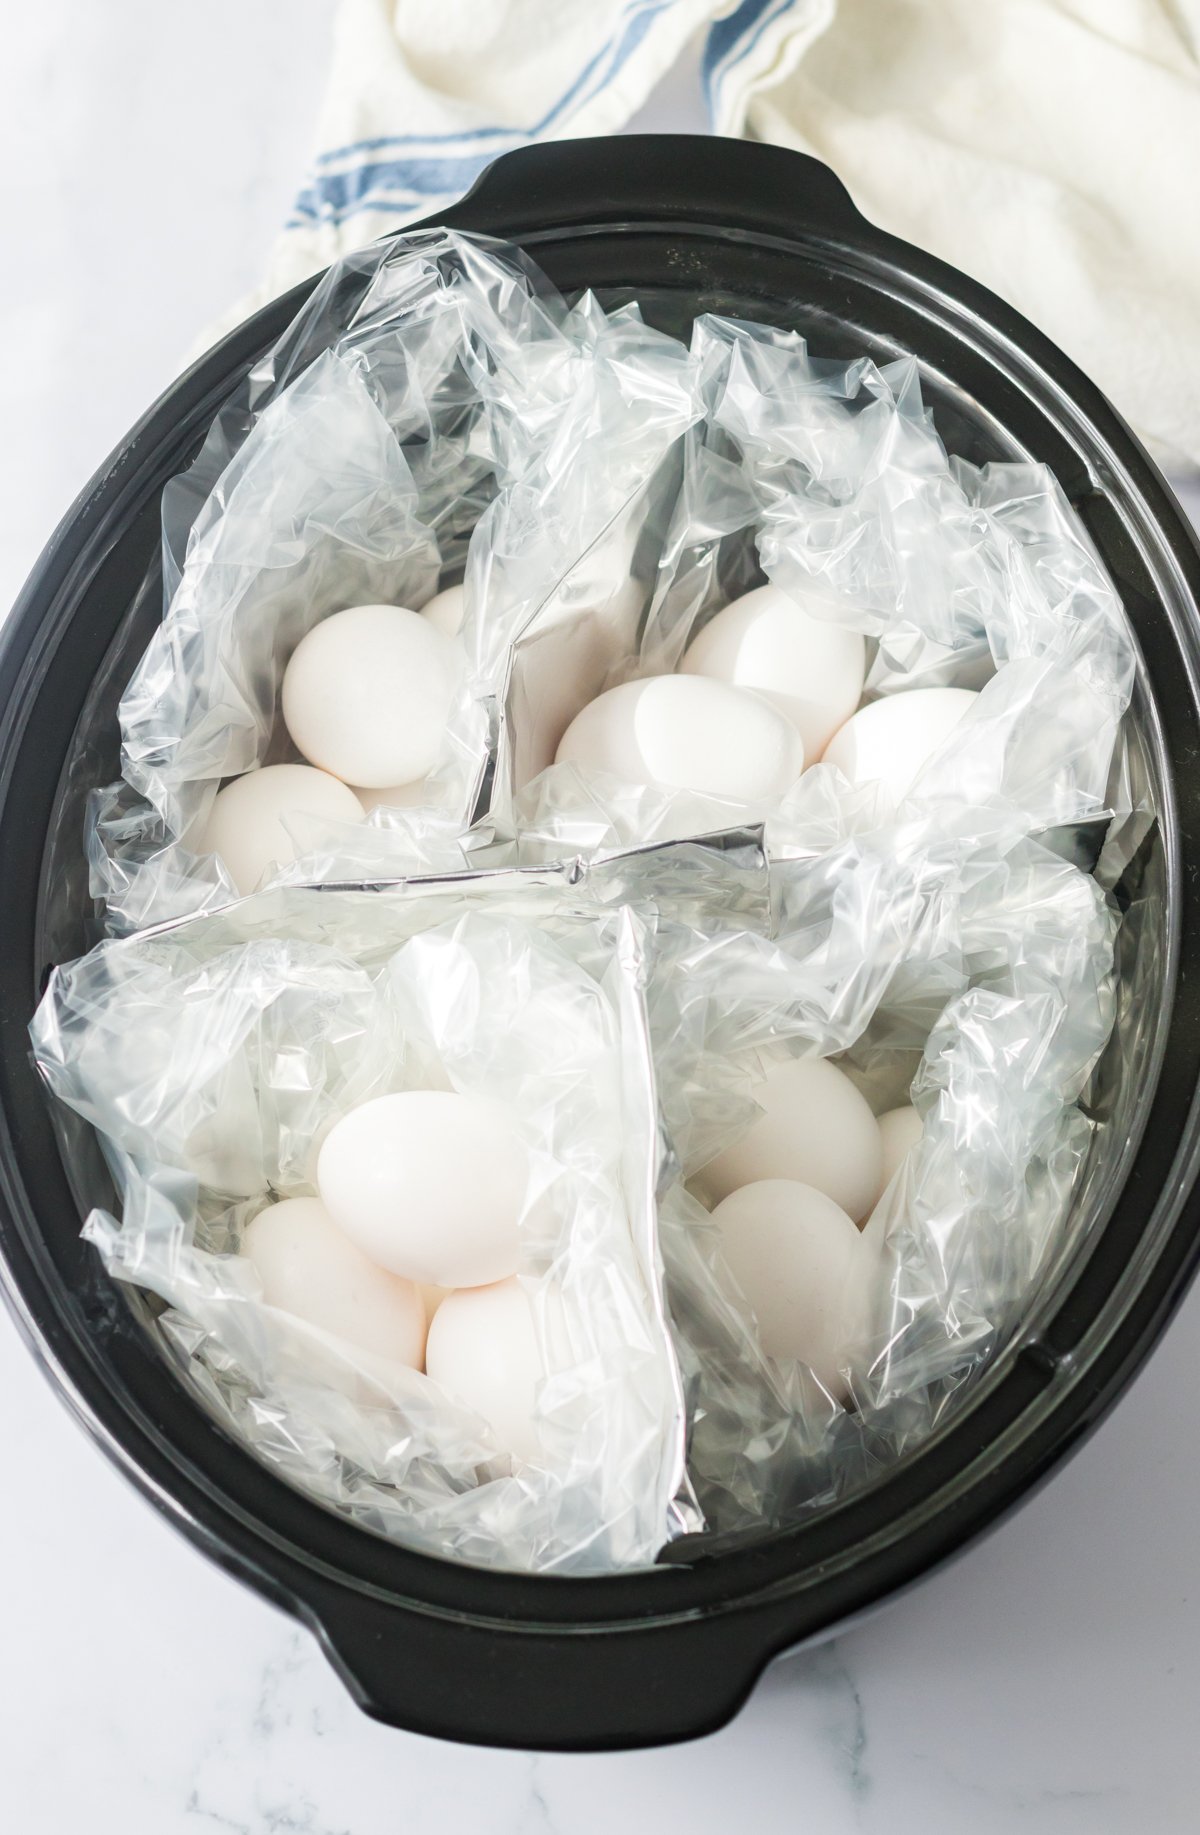 slow cooker with 16 hard boiled eggs inside